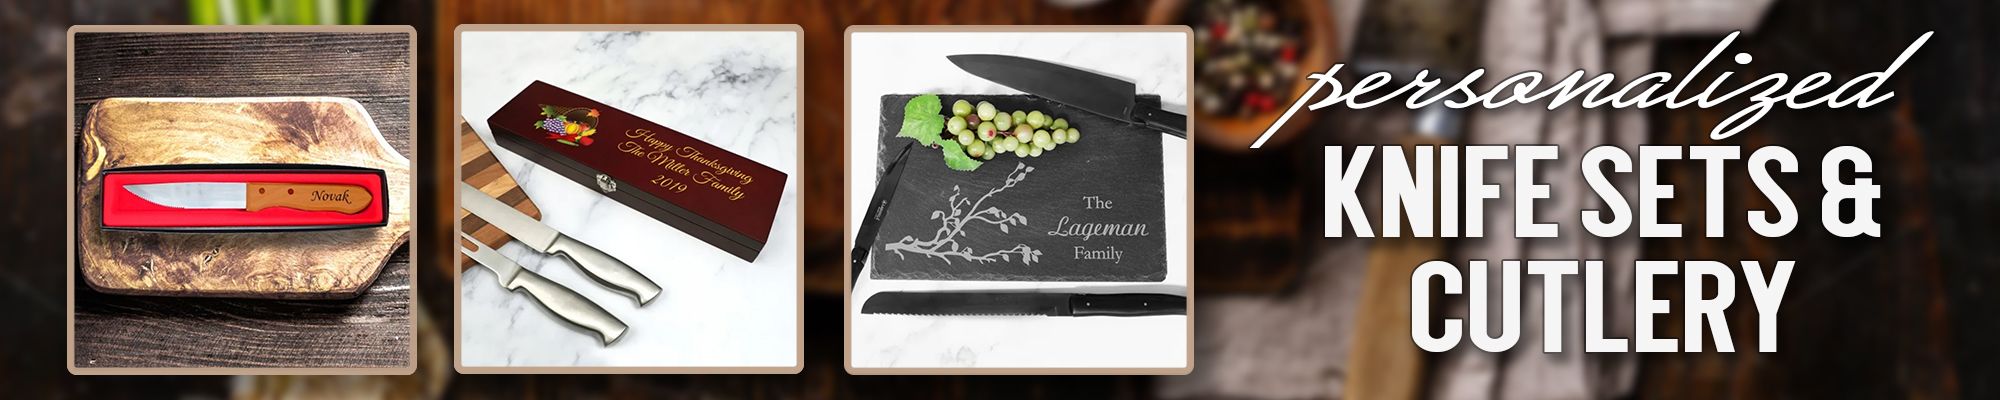 Personalized Knife Sets & Cutlery Gifts